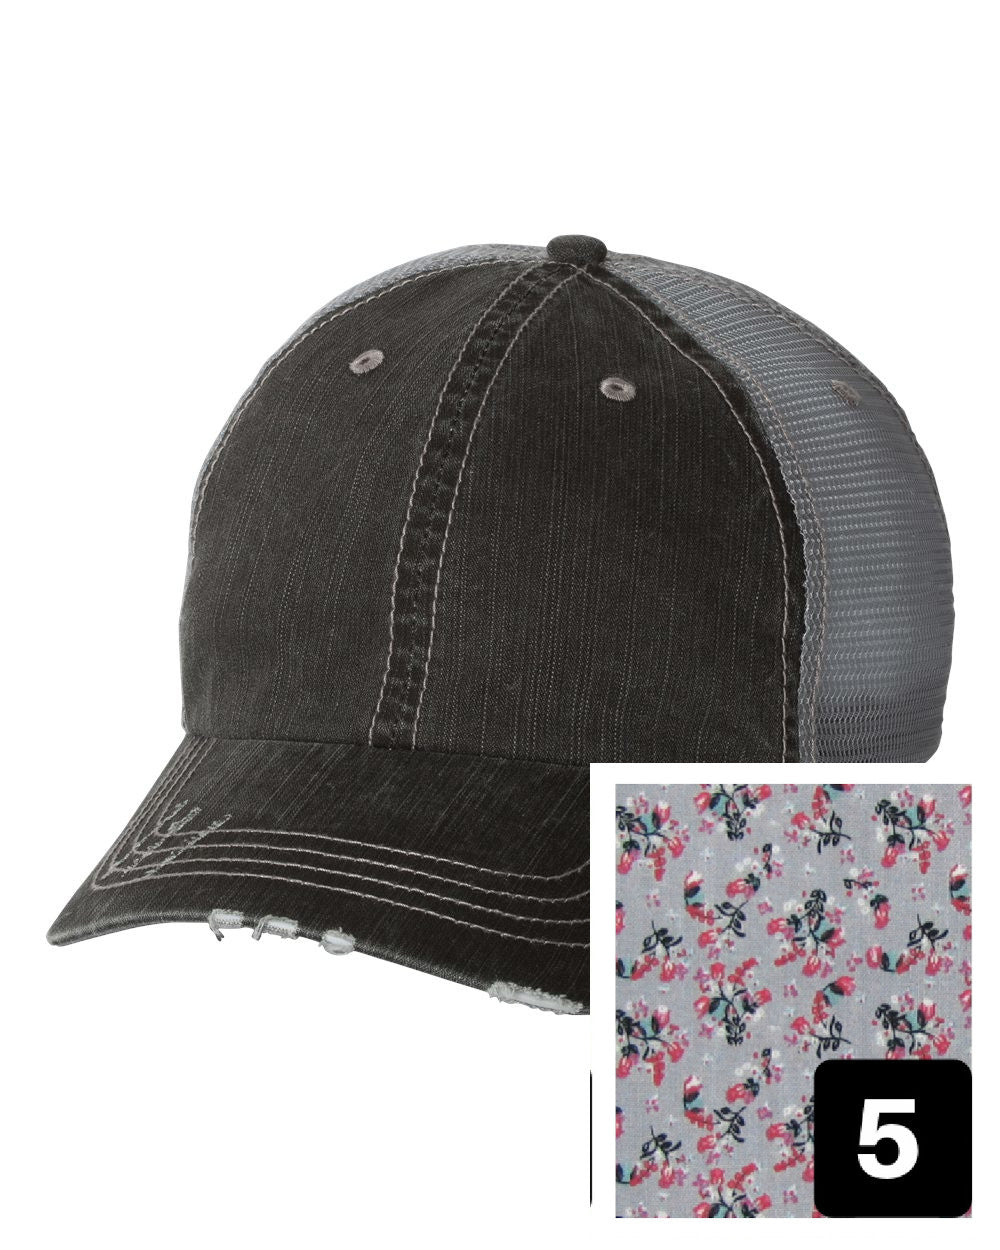 gray distressed trucker hat with purple and pink floral fabric state of North Dakota